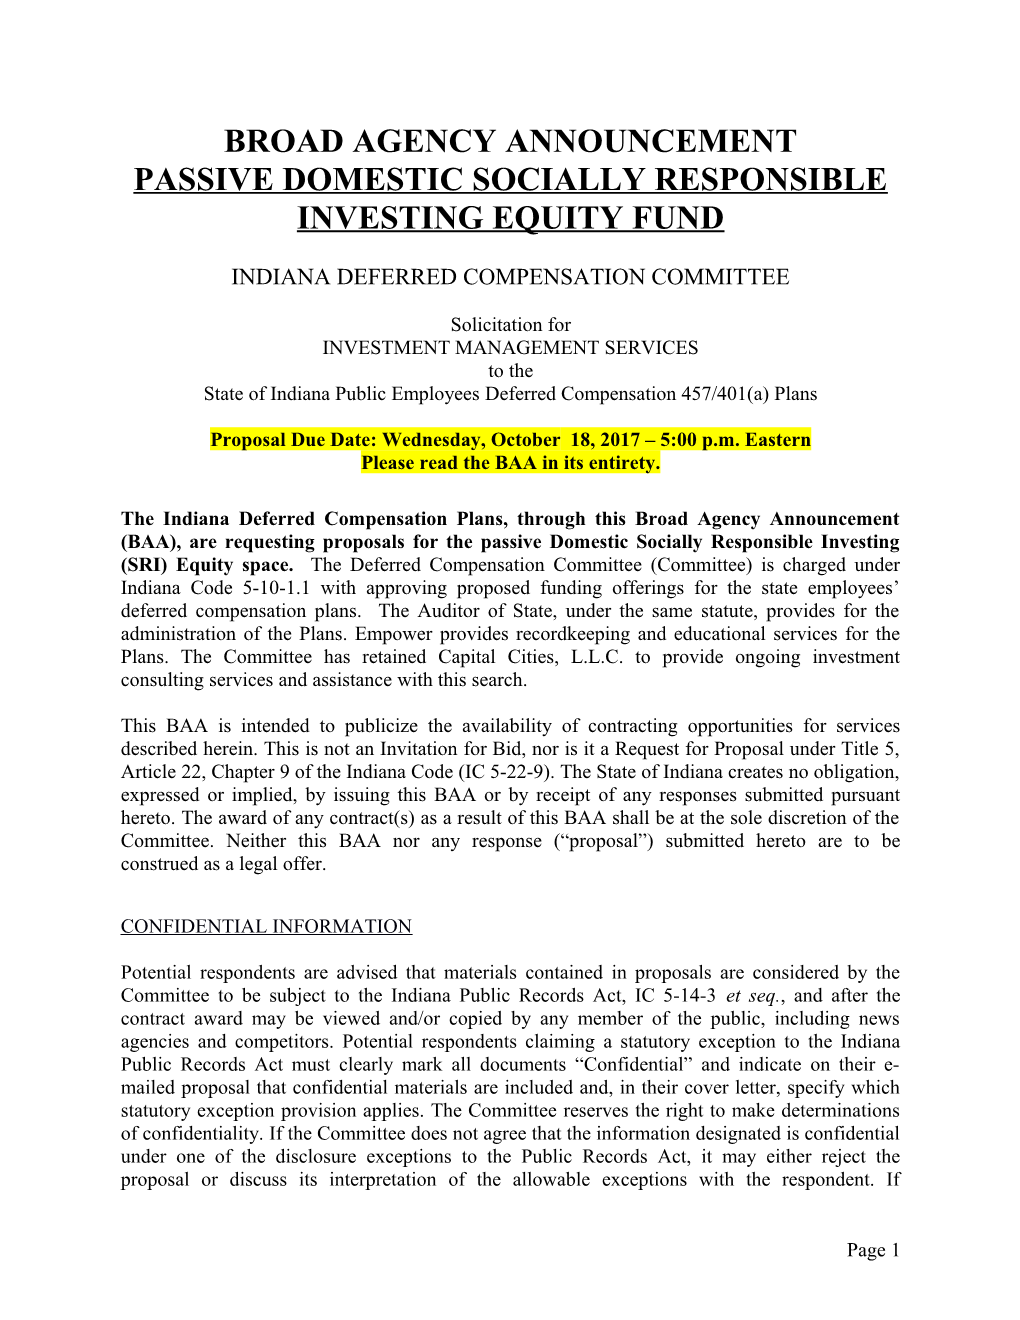 Passive Domestic Socially Responsible Investing Equity Fund